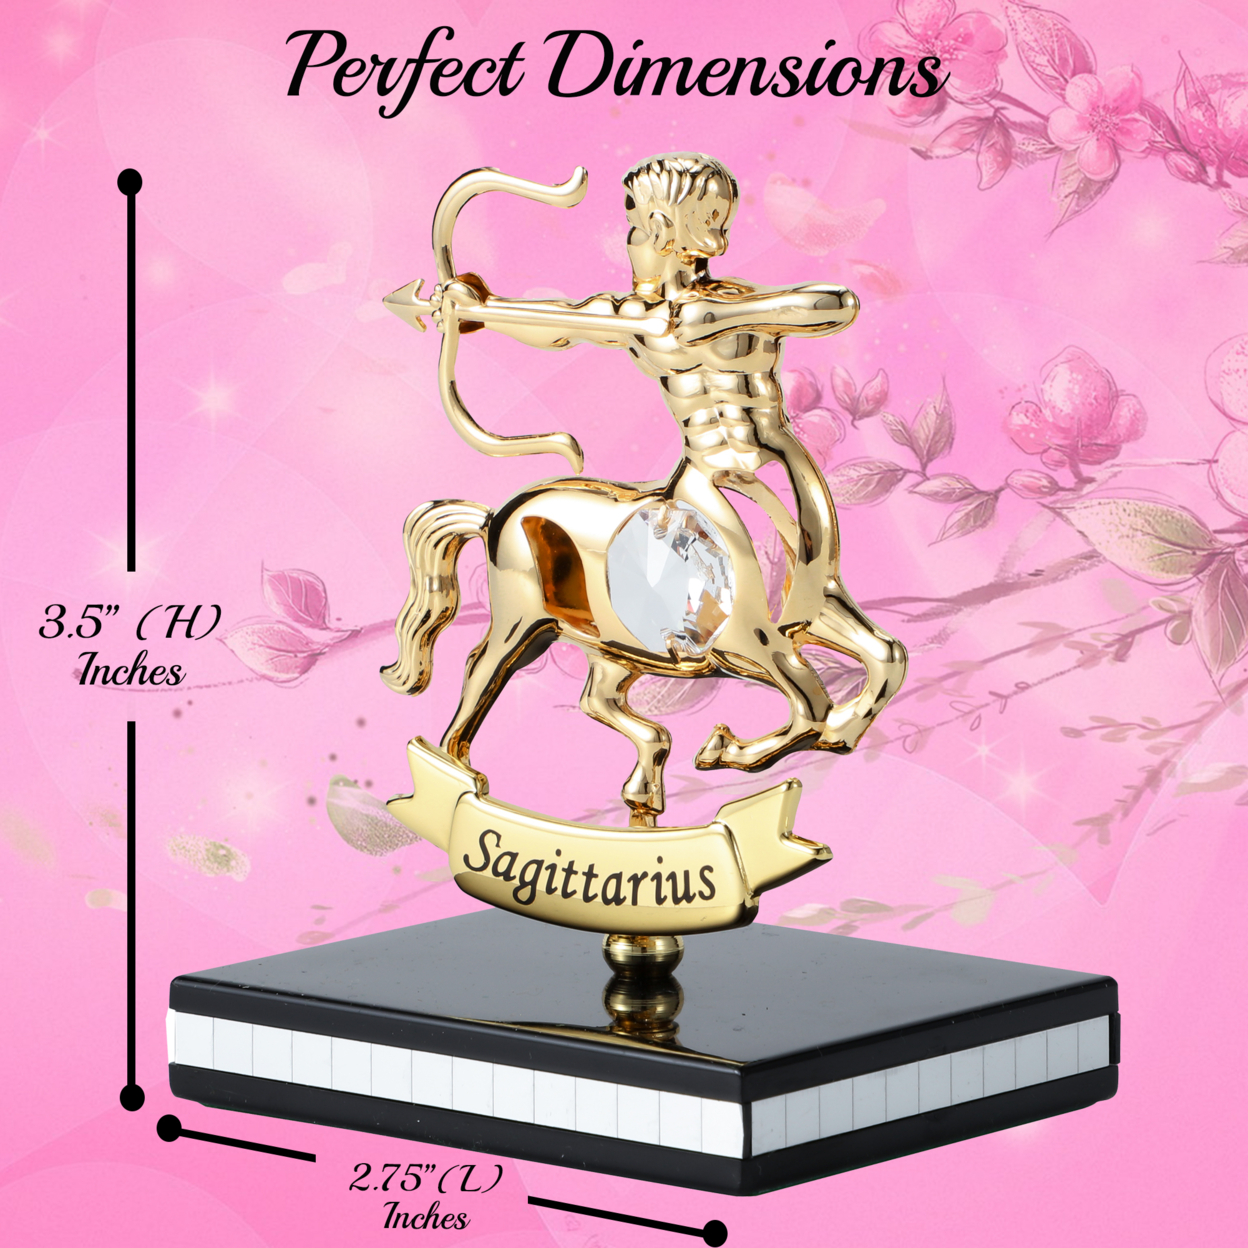 Matashi 24K Gold Plated Zodiac Astrological Sign Sagittarius Figurine Statuette On Stand Studded W/ Crystal Gift For Mom Girlfriend Wife Dad